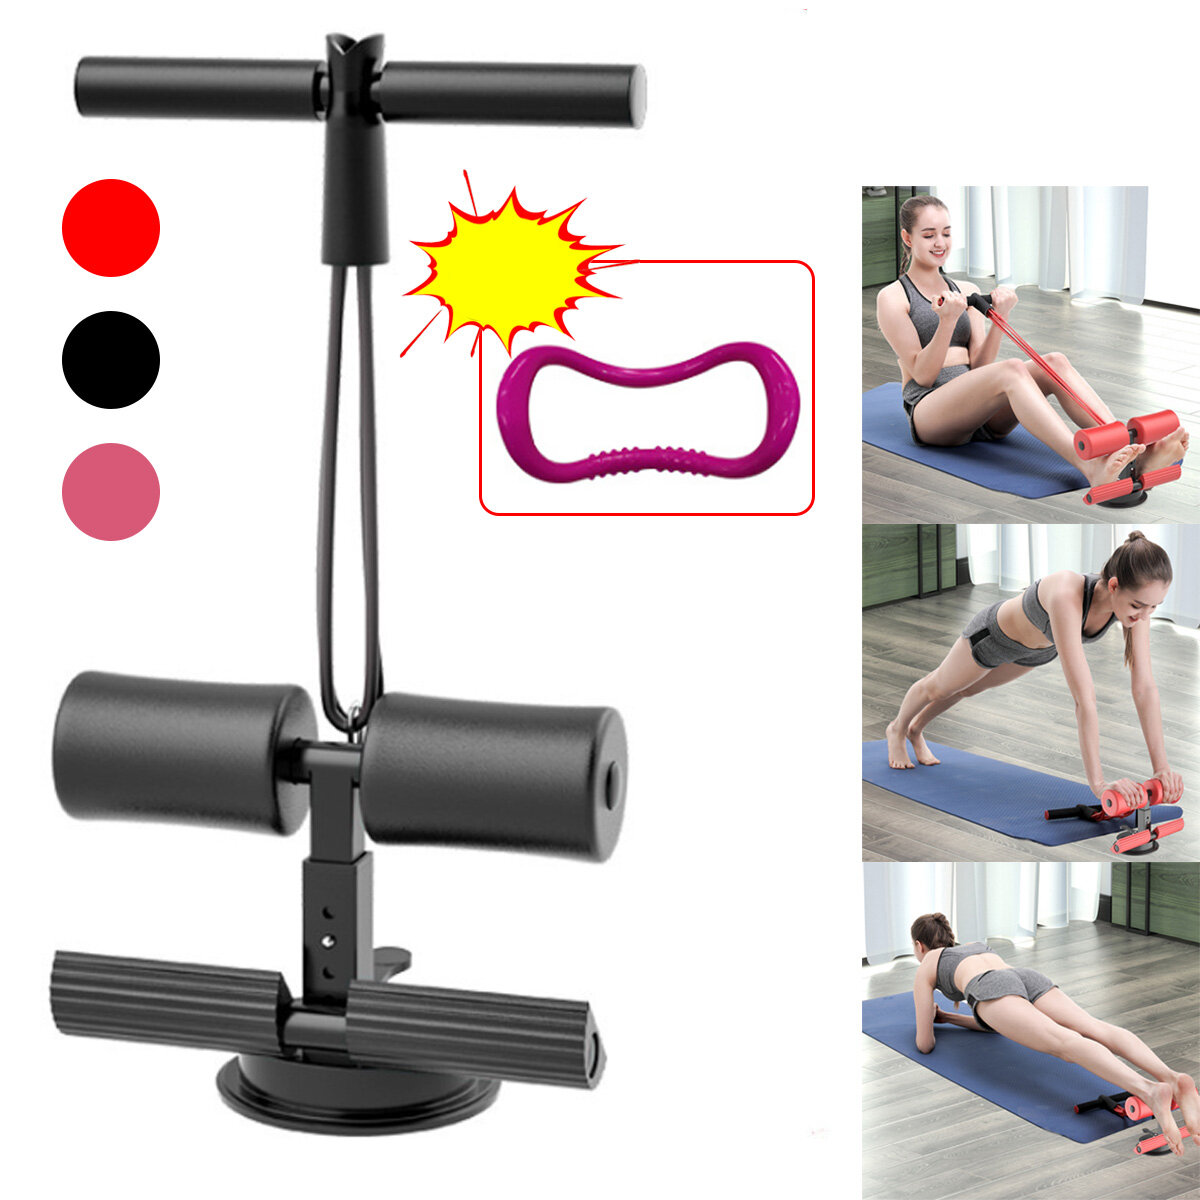 3 Gear Adjustable Sit-Ups Bar Sit-Ups Assistant Bracket Abdominal Muscle Trainer Workout Equipment Home Gym Fitness Tool